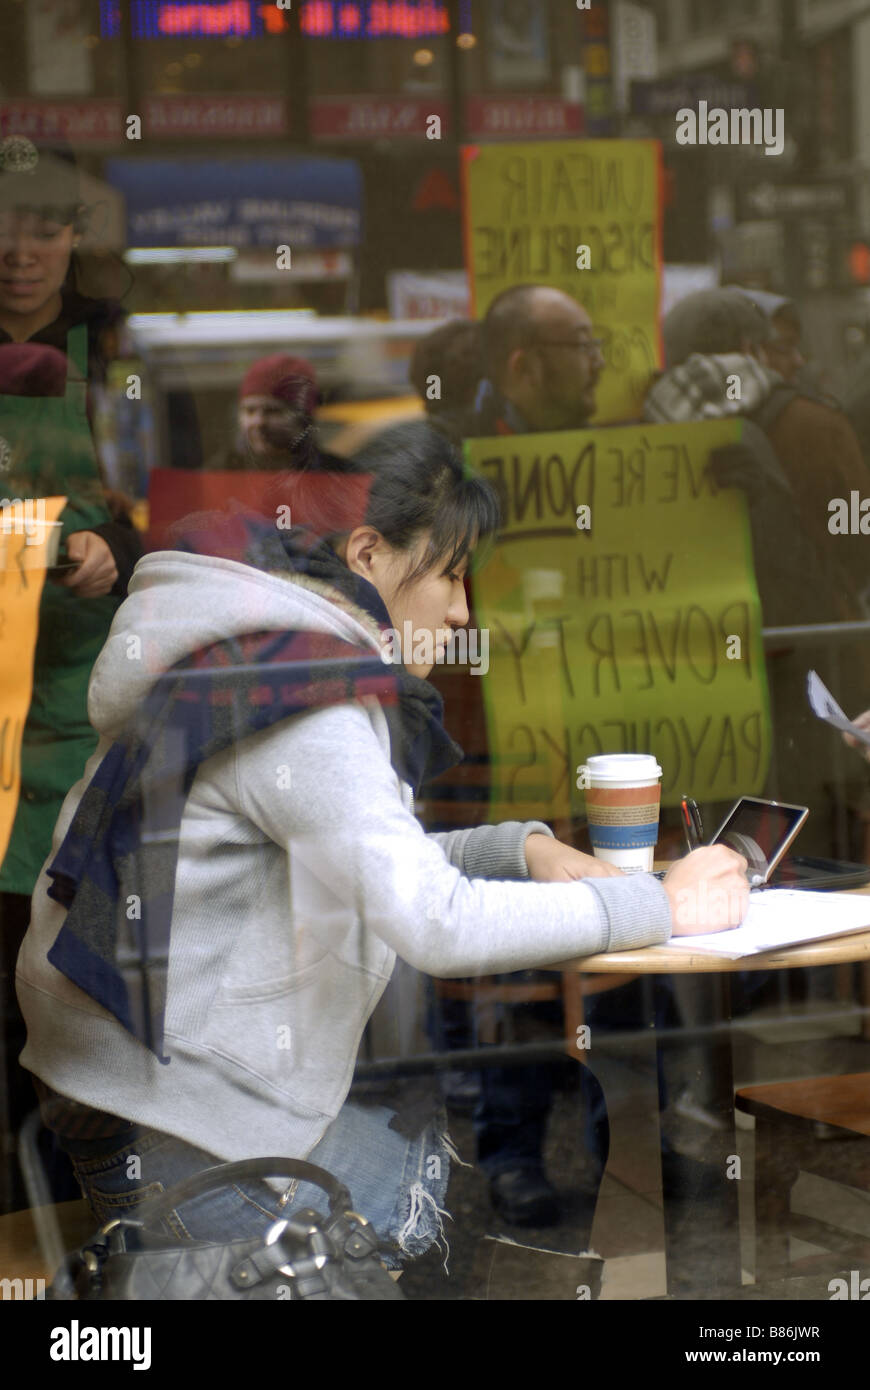 A woman in Starbucks as workers are reflected in the window during a protest over Starbucks alleged anti-union activity Stock Photo